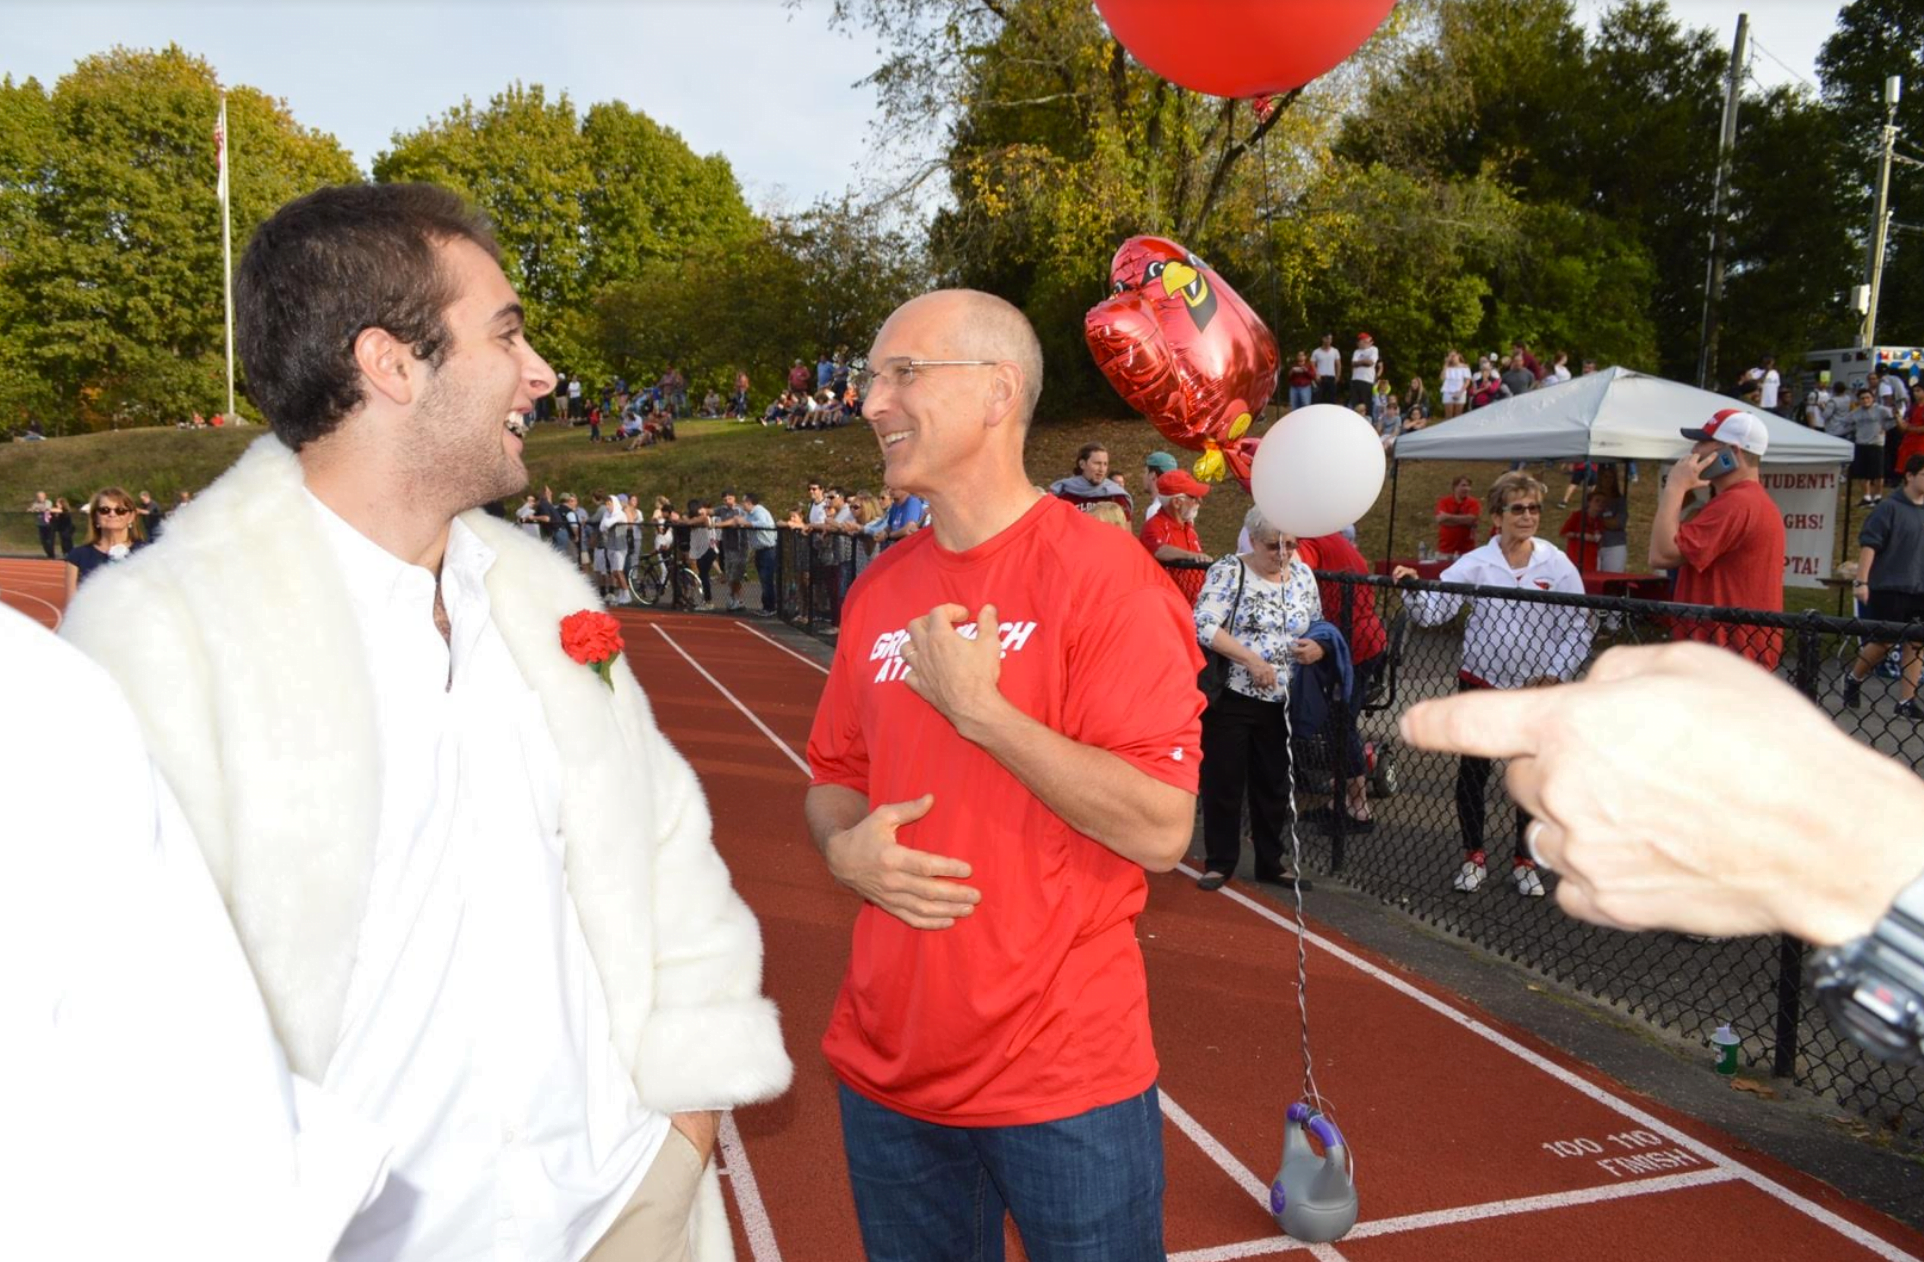 Romano Orlando and Dr. Chris Winters at the GHS homecoming football game on Oct 21, 2017 Photo: Monique Nikolov